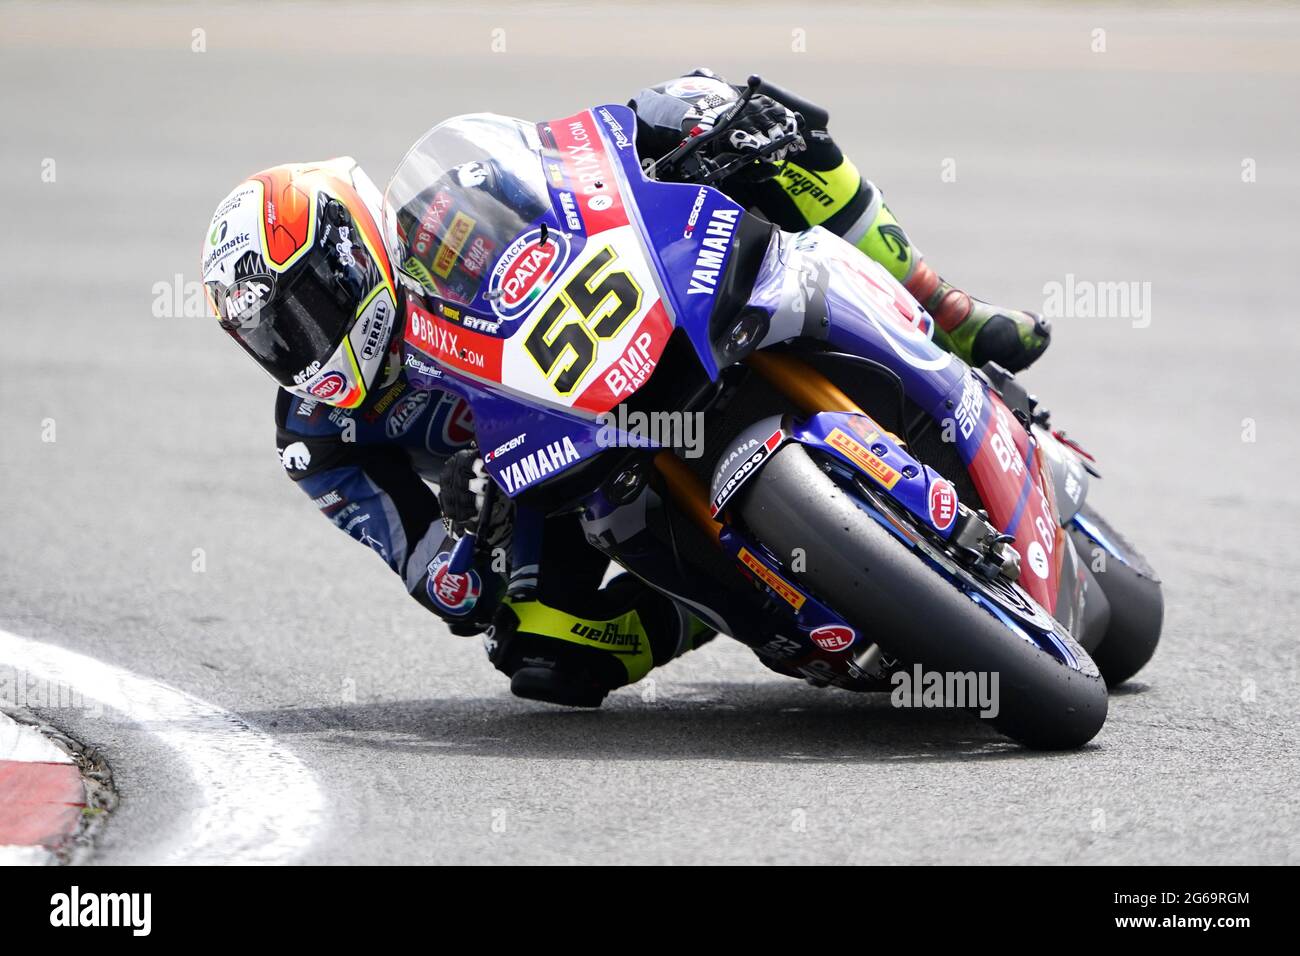 Antonio Locatelli of Pata Yamaha with BRIXX WorldSBK in Race 2 during day two of the Motul Fim Superbike Championship 2021 at Donington Park, Leicestershire. Saturday July 4, 2021. Stock Photo